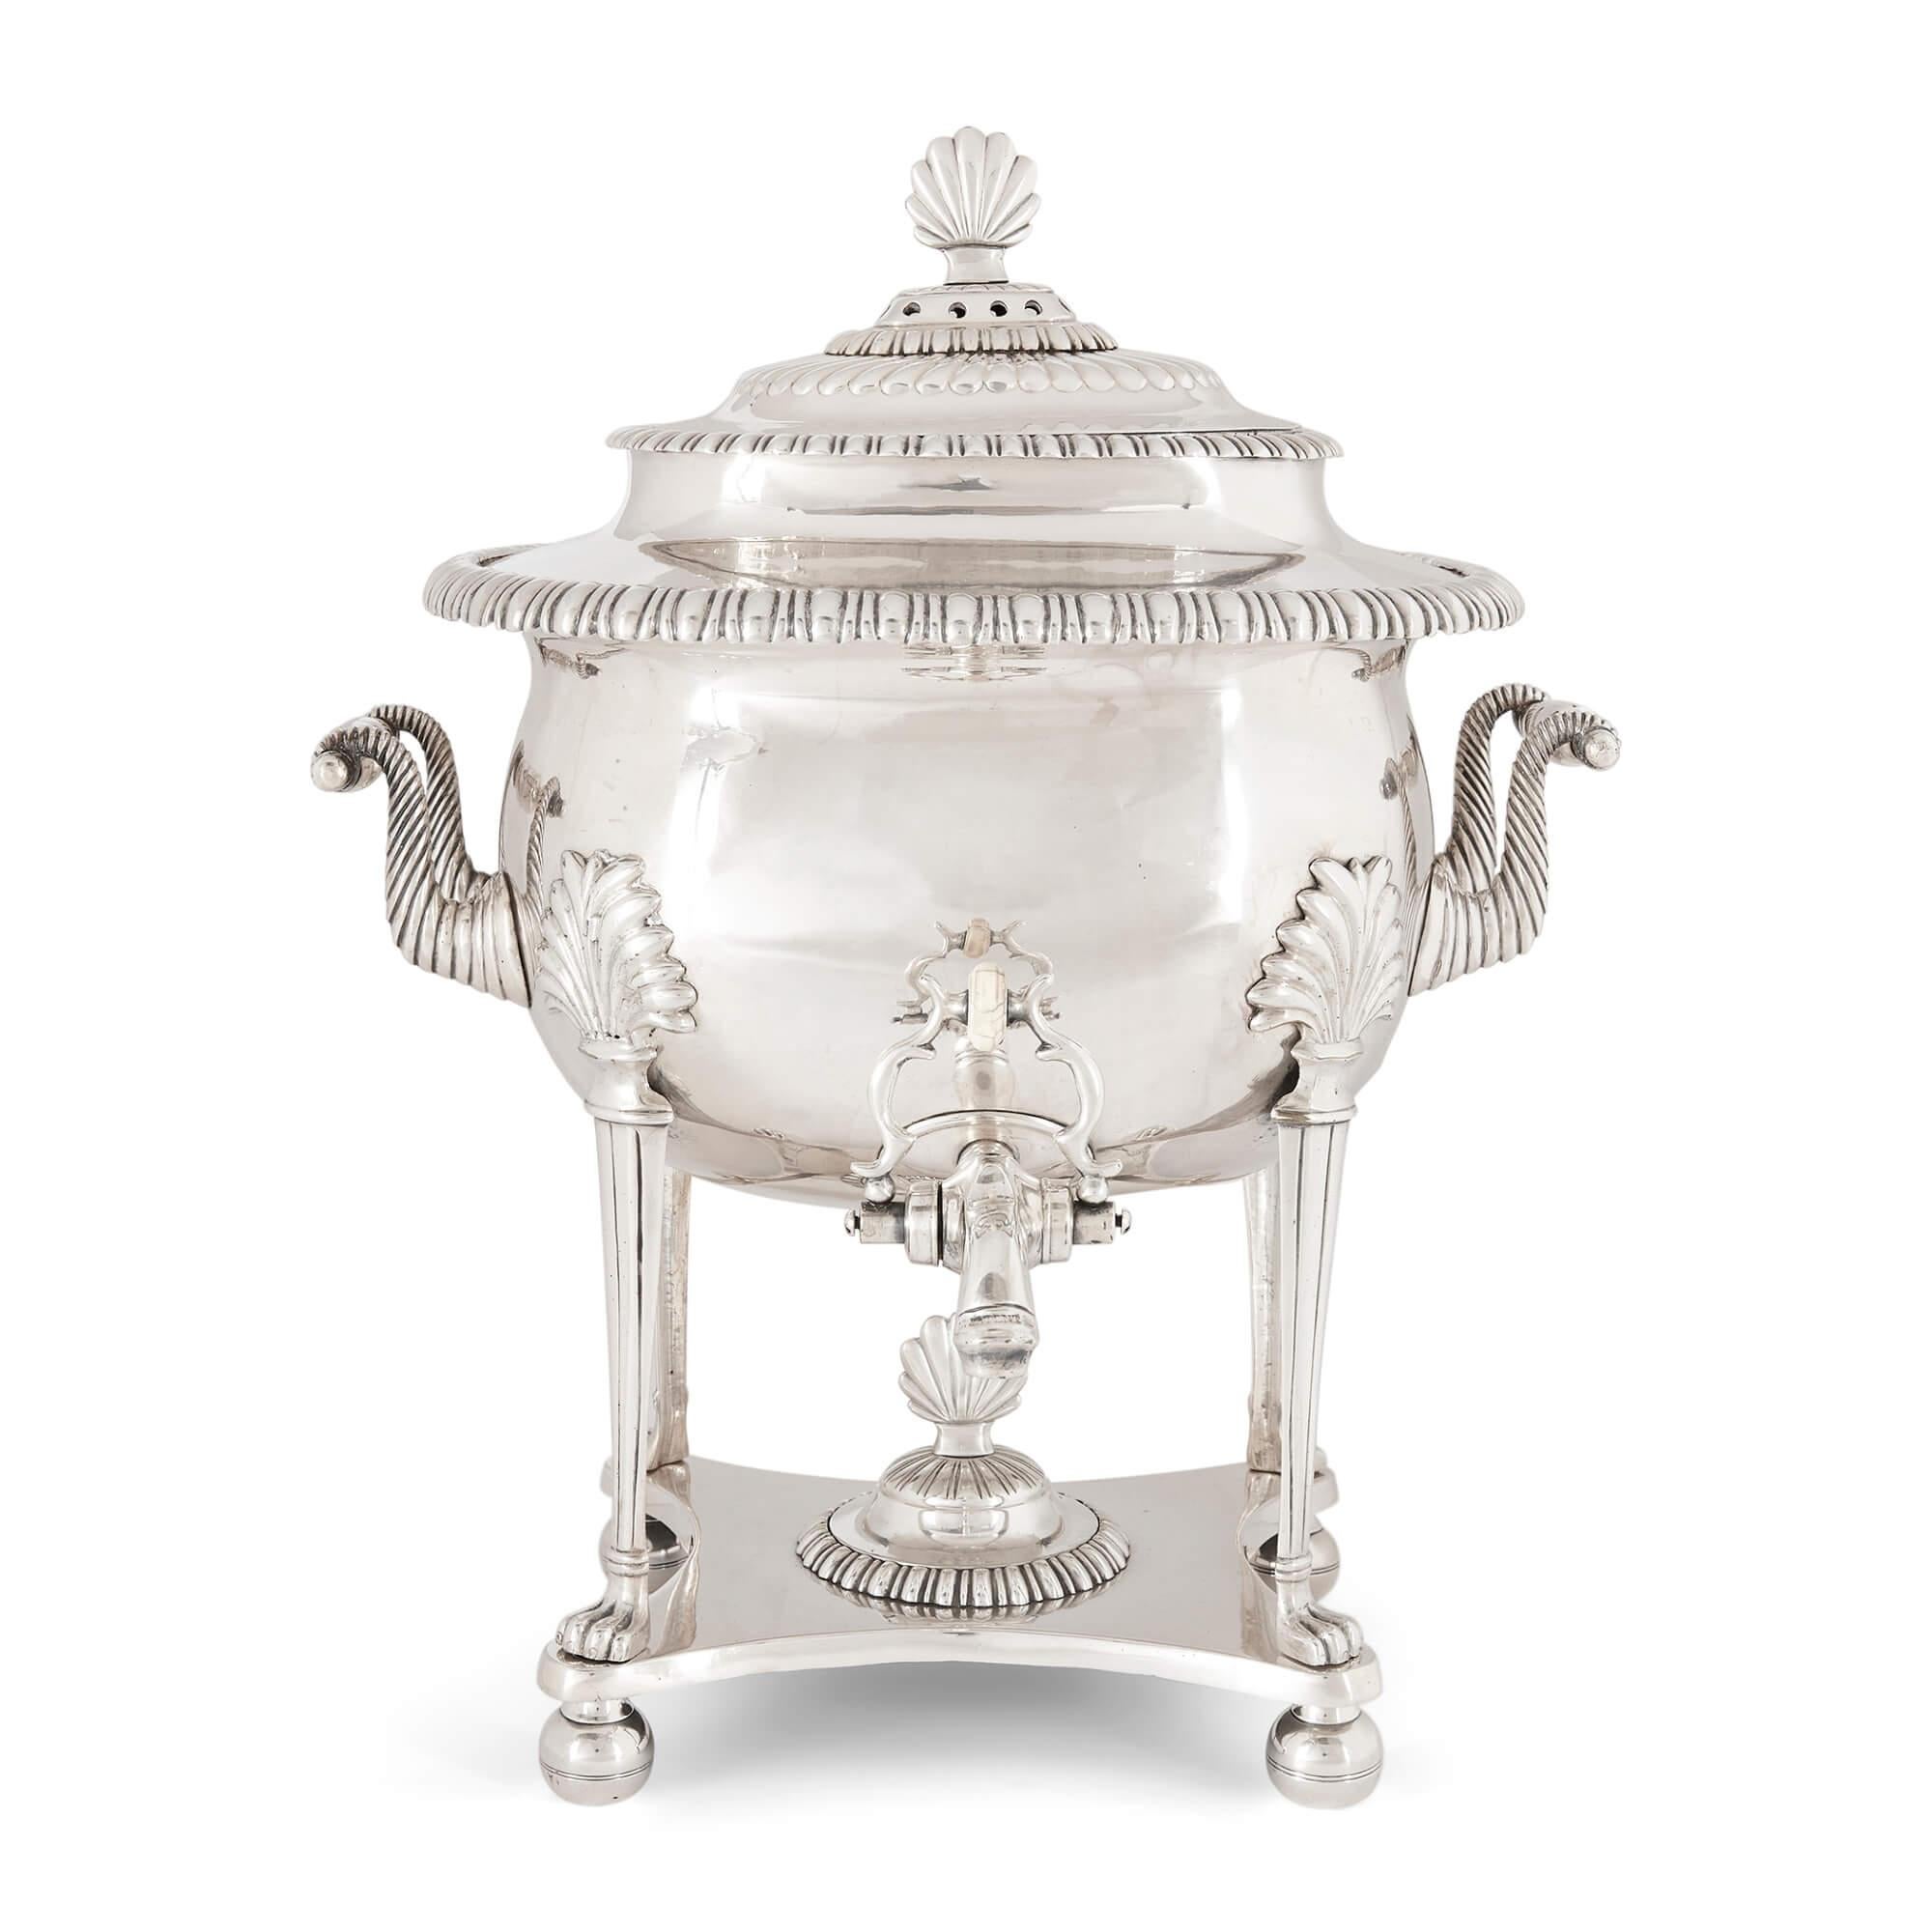 A twin-handled English silver plated samovar
English, Late 19th century
Measures: Height 43cm, width 33cm, depth 33cm

This magnificent piece is a large silver plated and bone handled samovar, a large vessel used in the preparation of tea, and